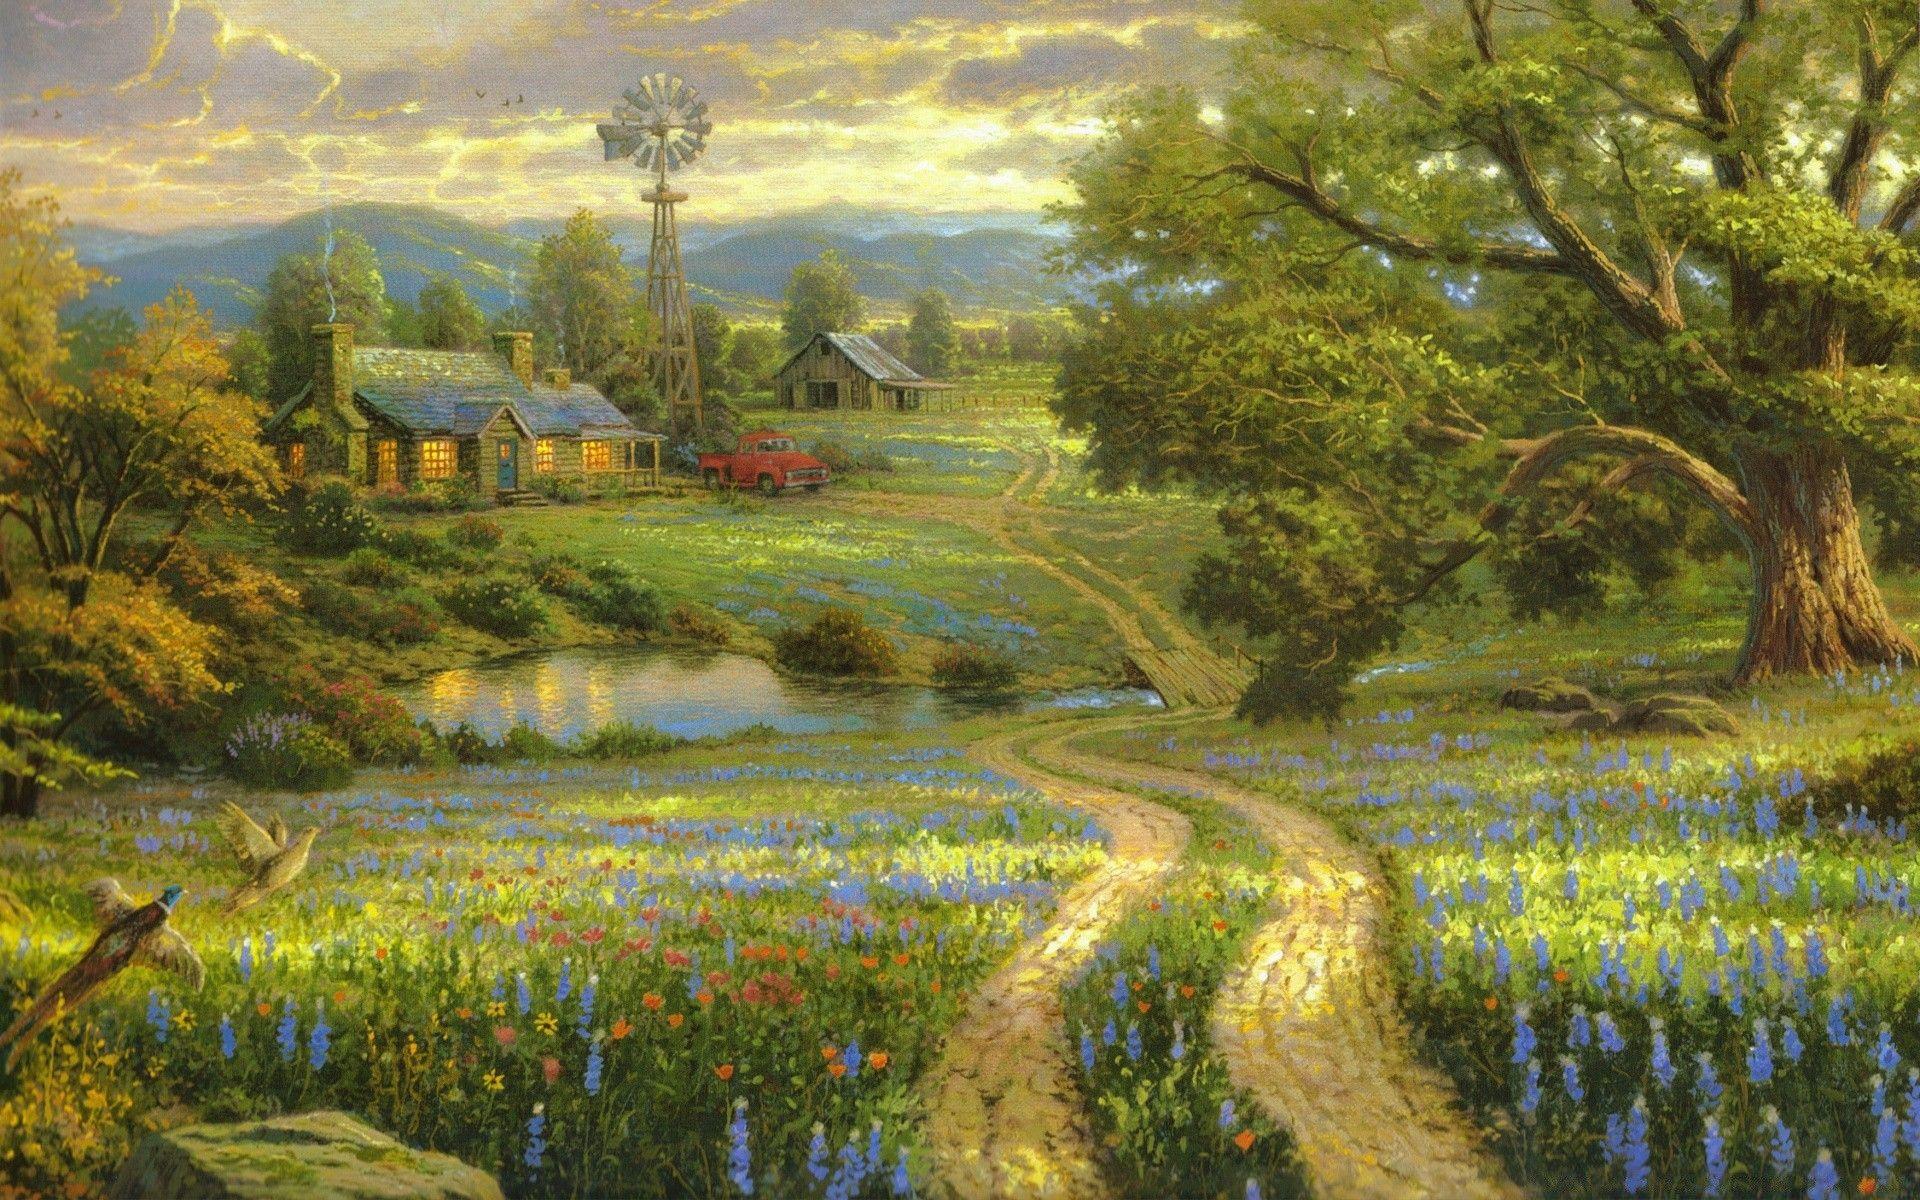 Country Living by Thomas Kinkade. Android wallpaper for free